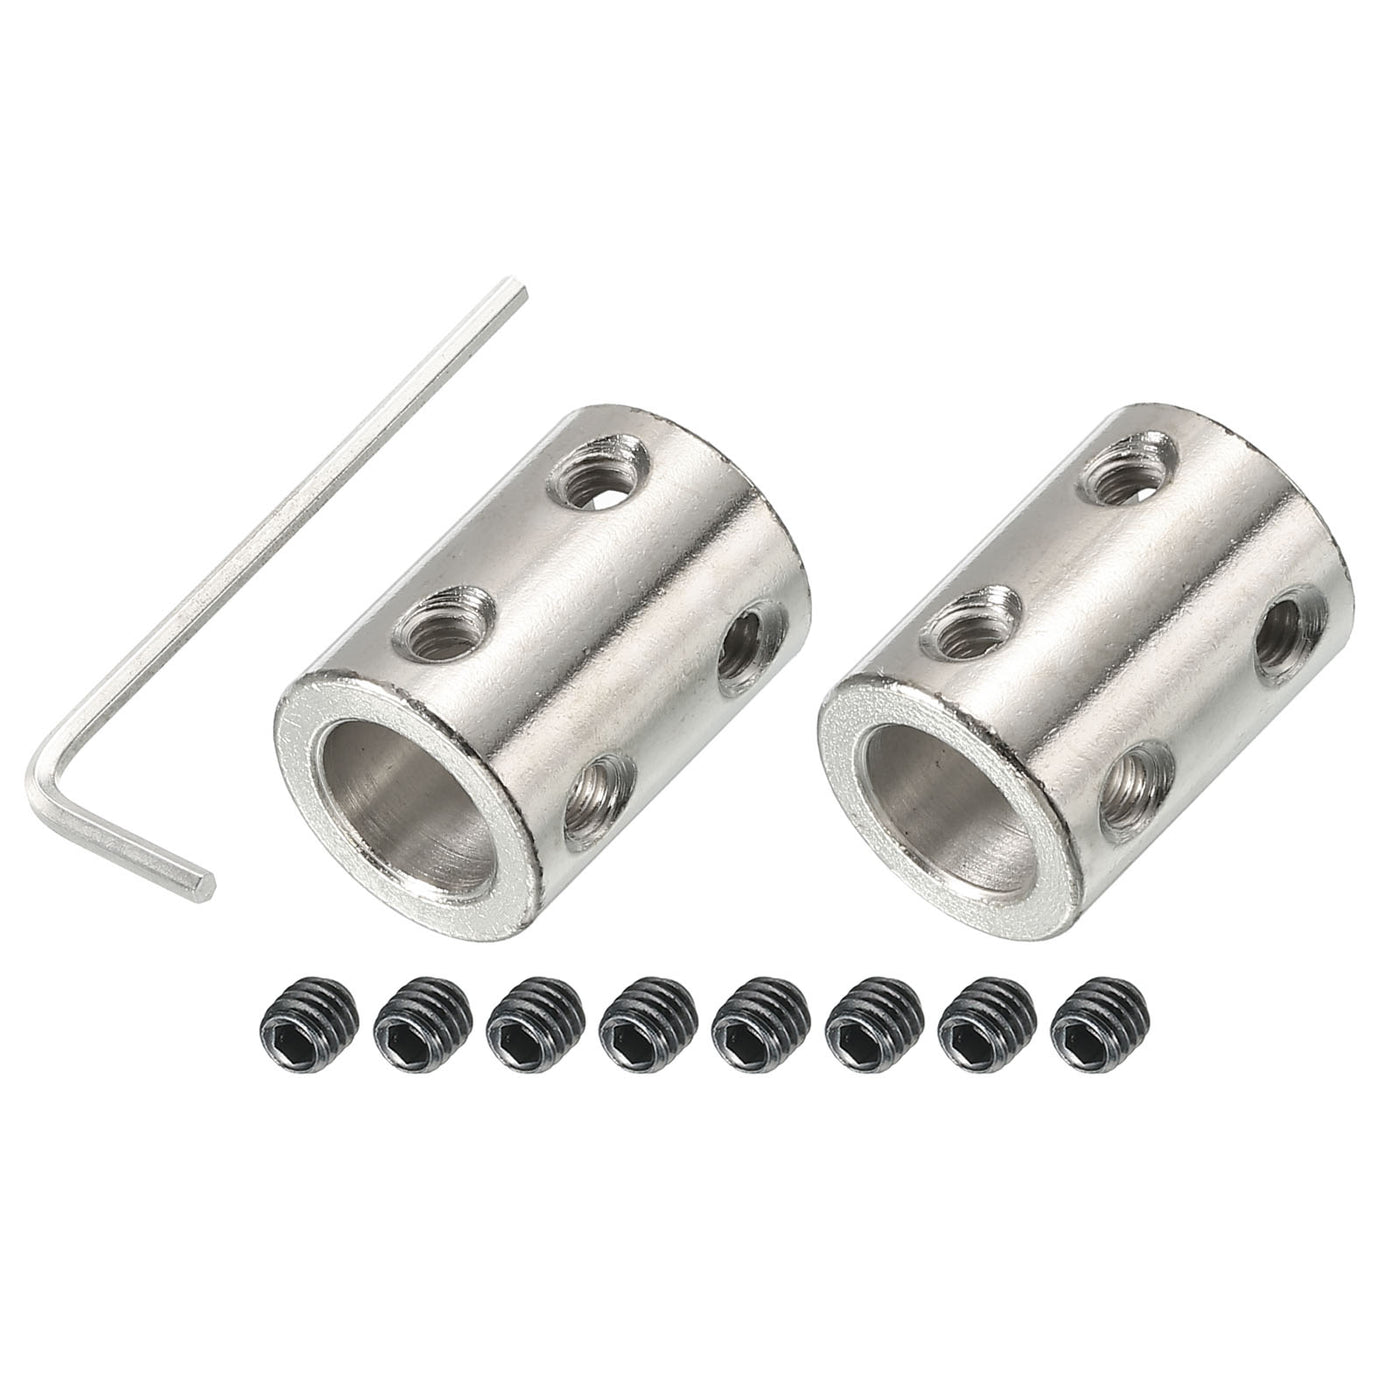 Harfington Shaft Coupler L22xD16 10mm Stainless Steel W Screw,Wrench Silver 2Pcs